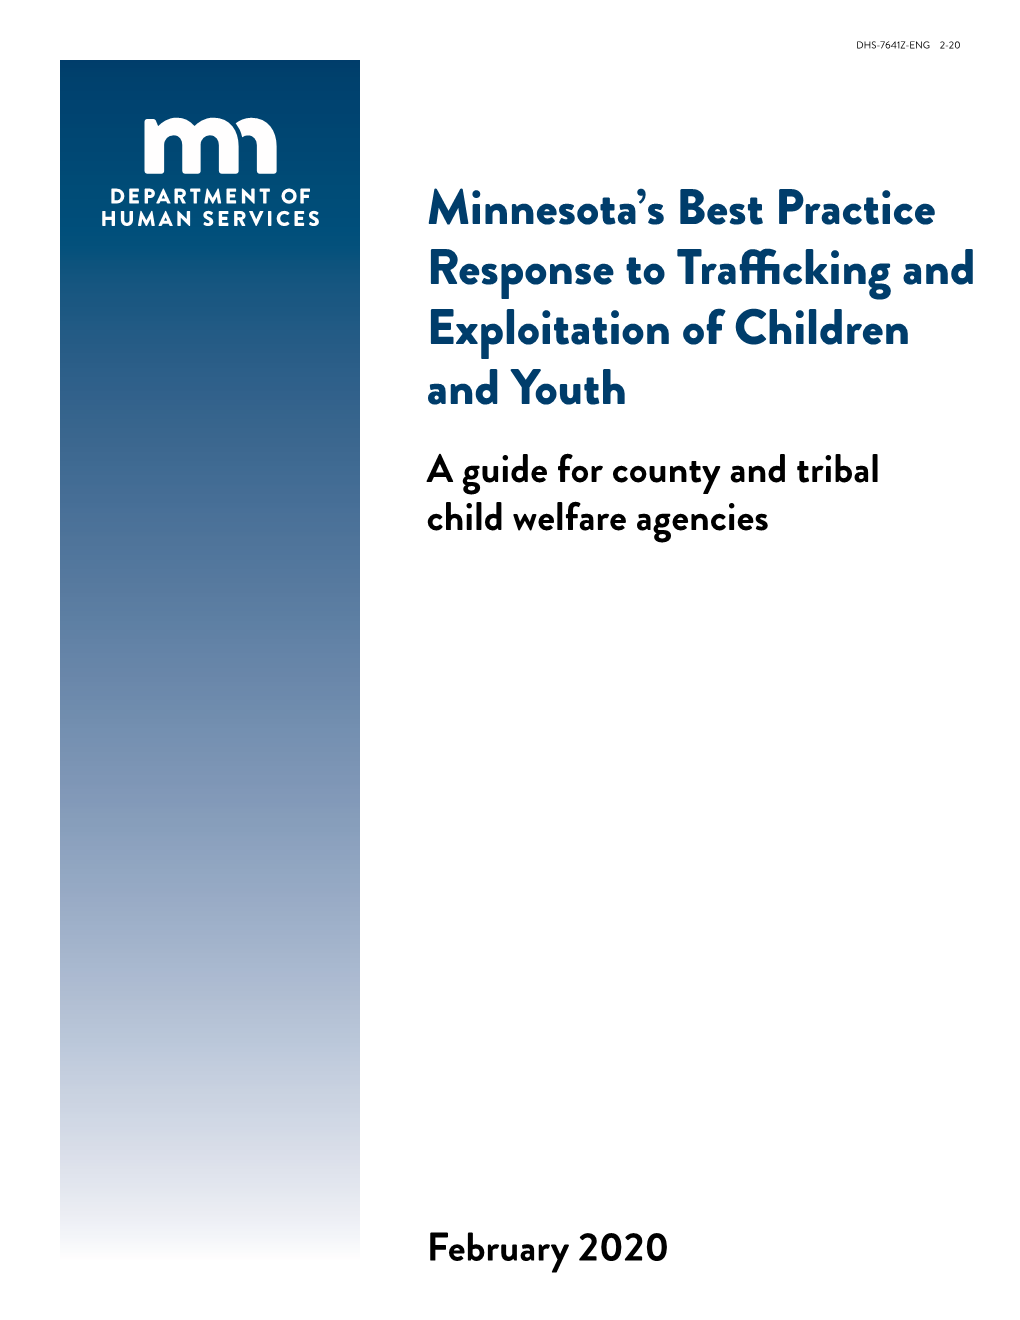 DHS Child Welfare Best Practice Guide